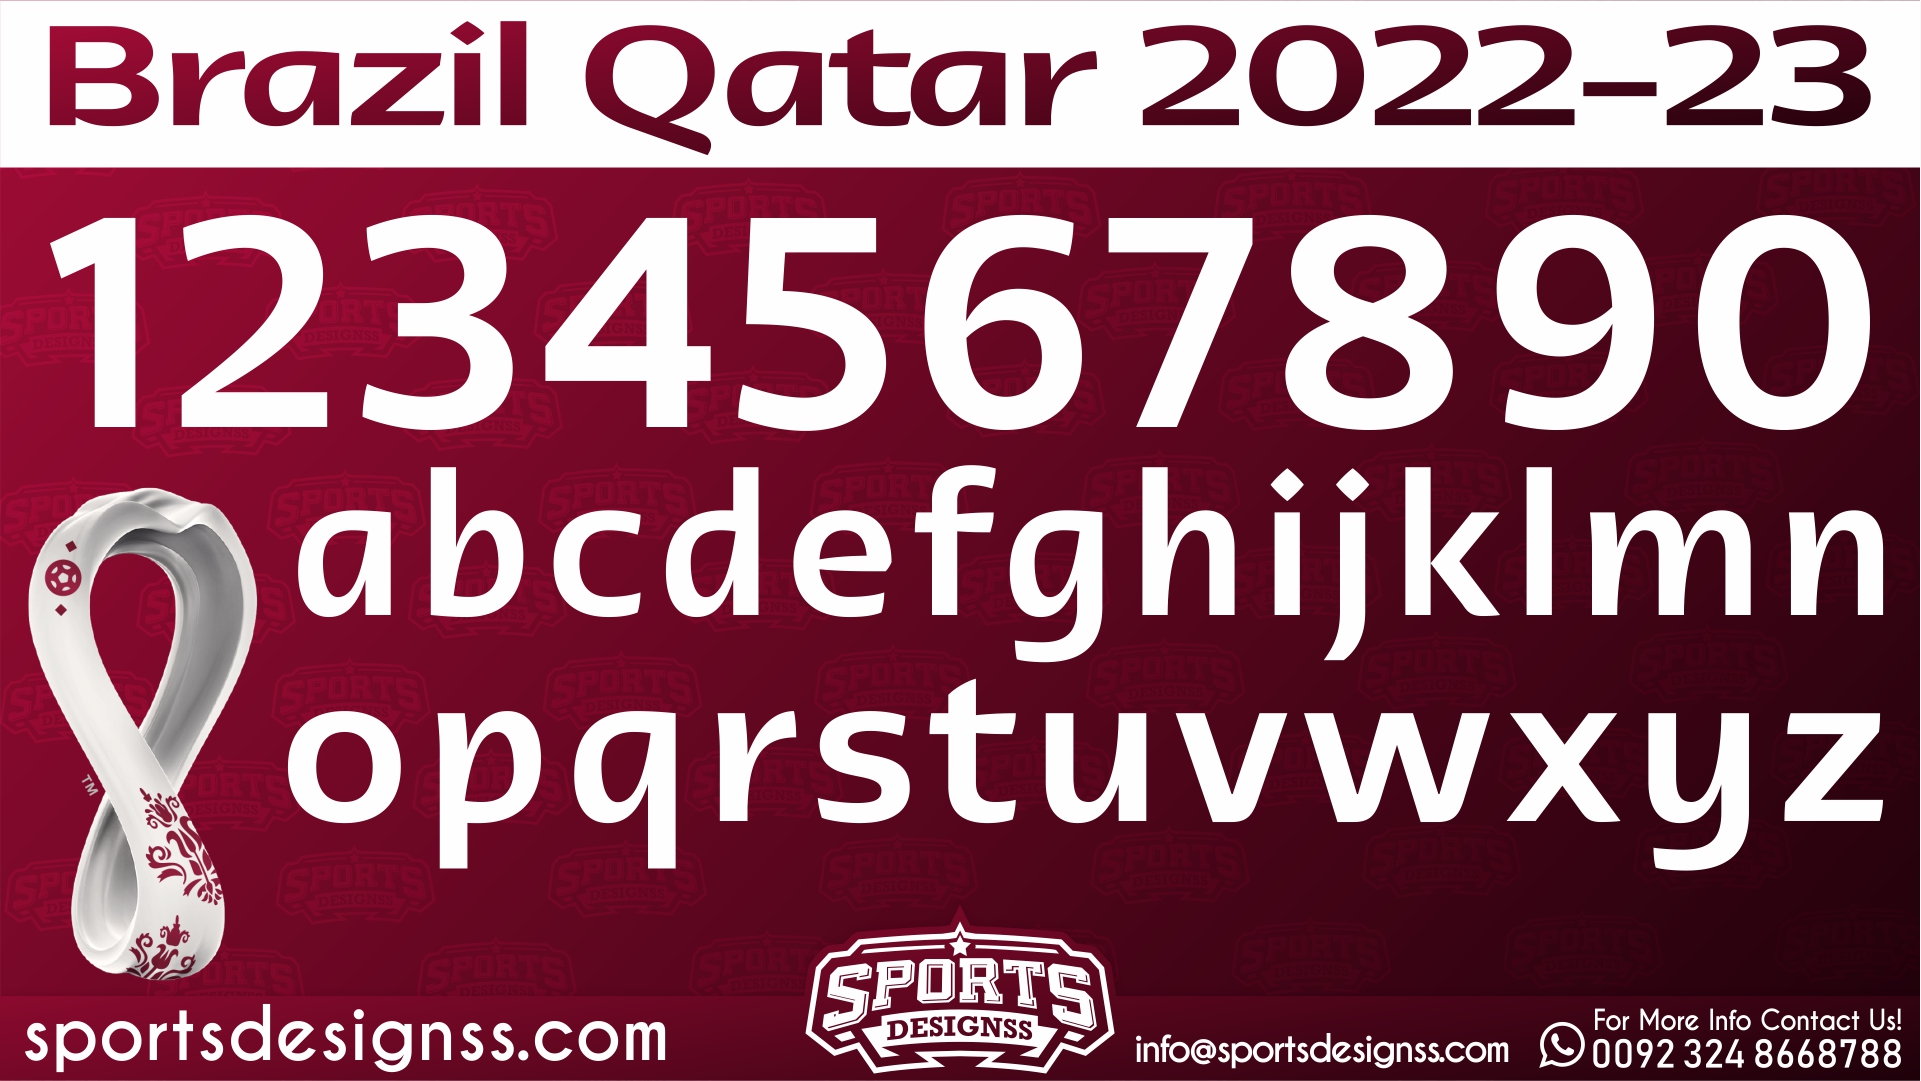 🔥QATAR WORLDCUP 2022-23 Font Free Download by Sports Designss_Free football Fonts 2023 🔥